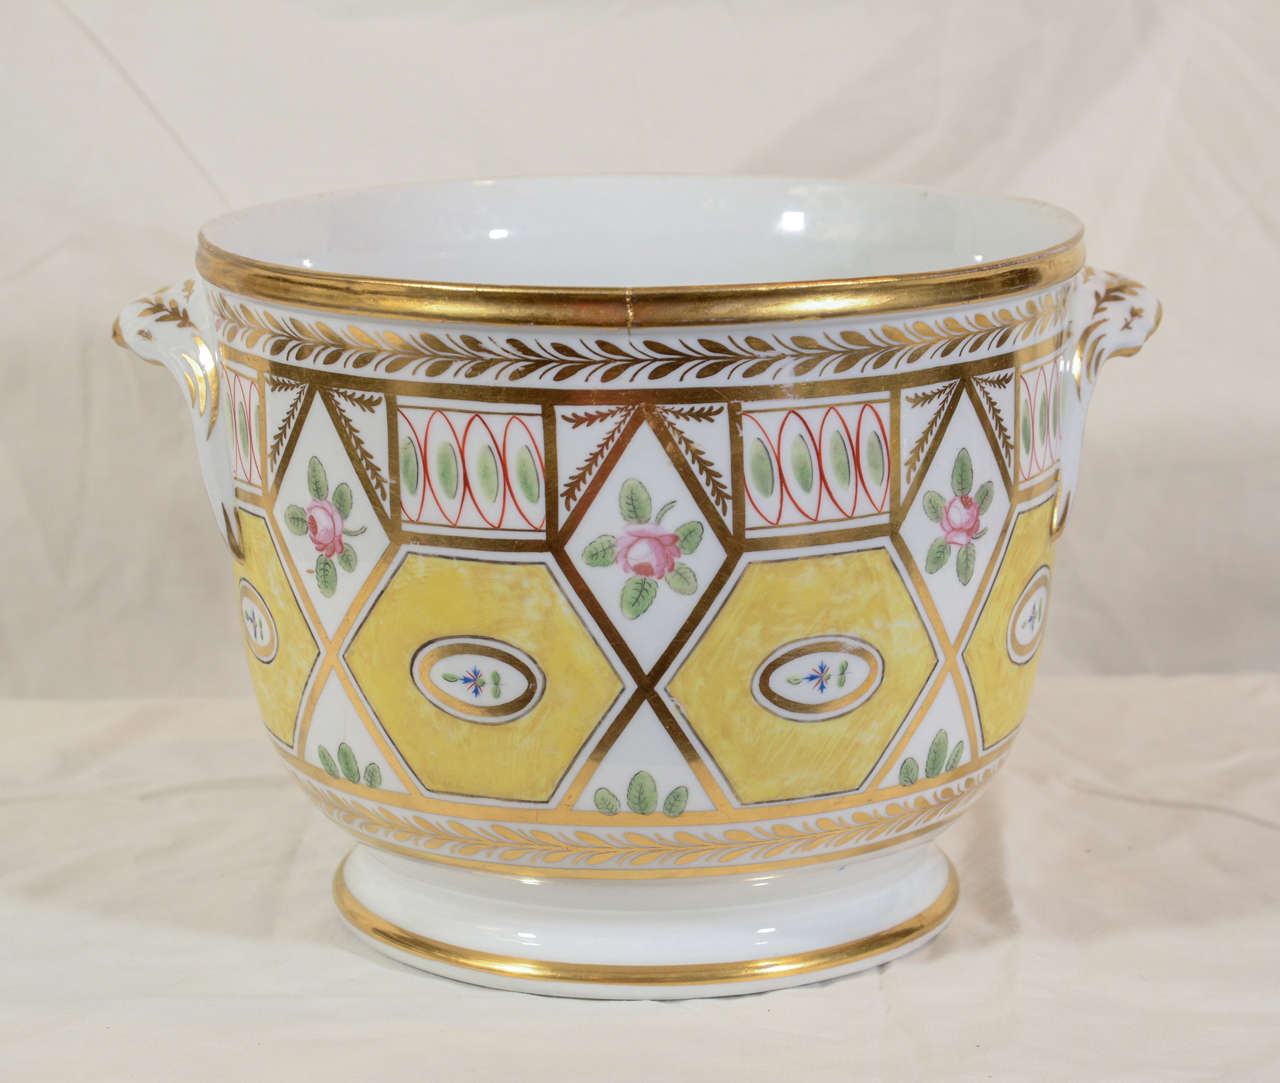 An early 19th century, Coalport wine cooler in the remarkable Church Gresley pattern with yellow ground hexagons, roses, and exceptional gilding, it is an excellent example of Regency period style.
Perfect for use as a cache pot, possibly for an